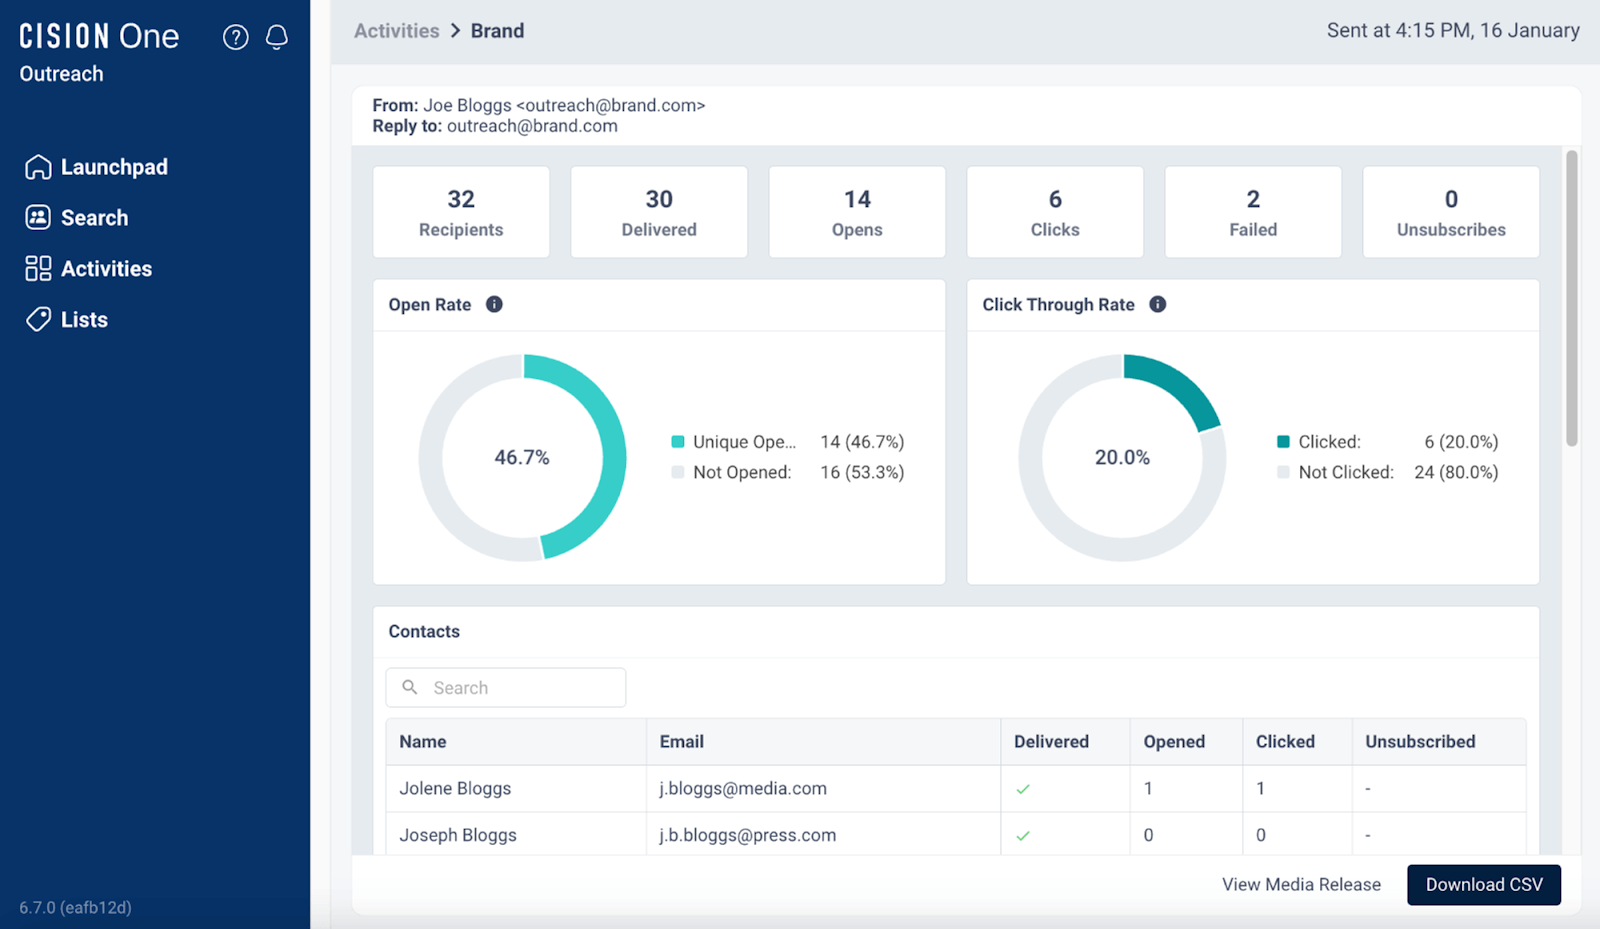 An example of an email outreach performance dashboard in CisionOne